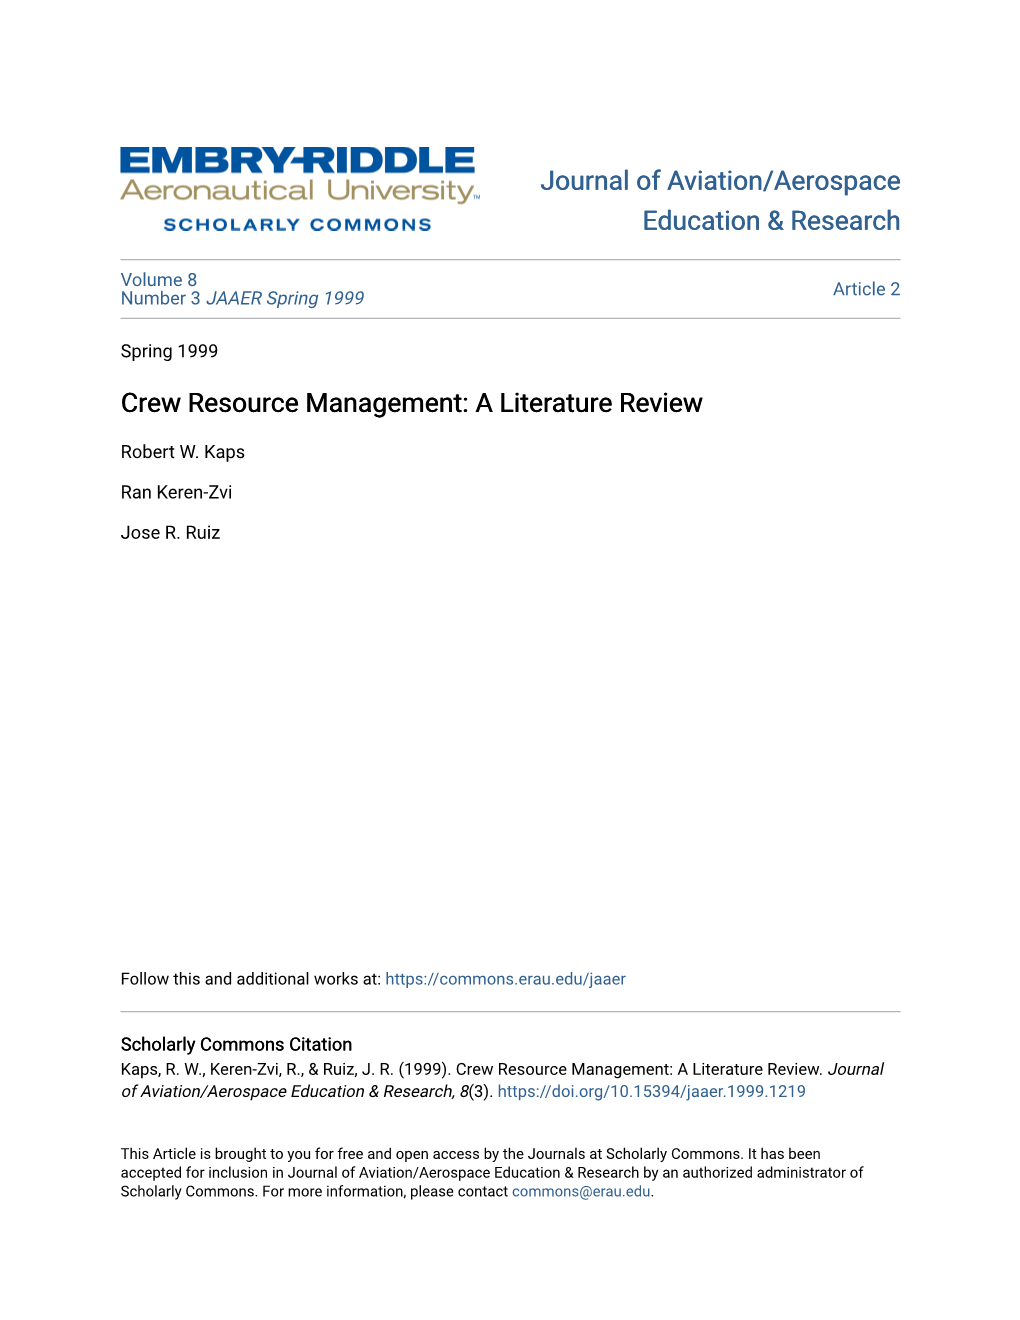 Crew Resource Management: a Literature Review